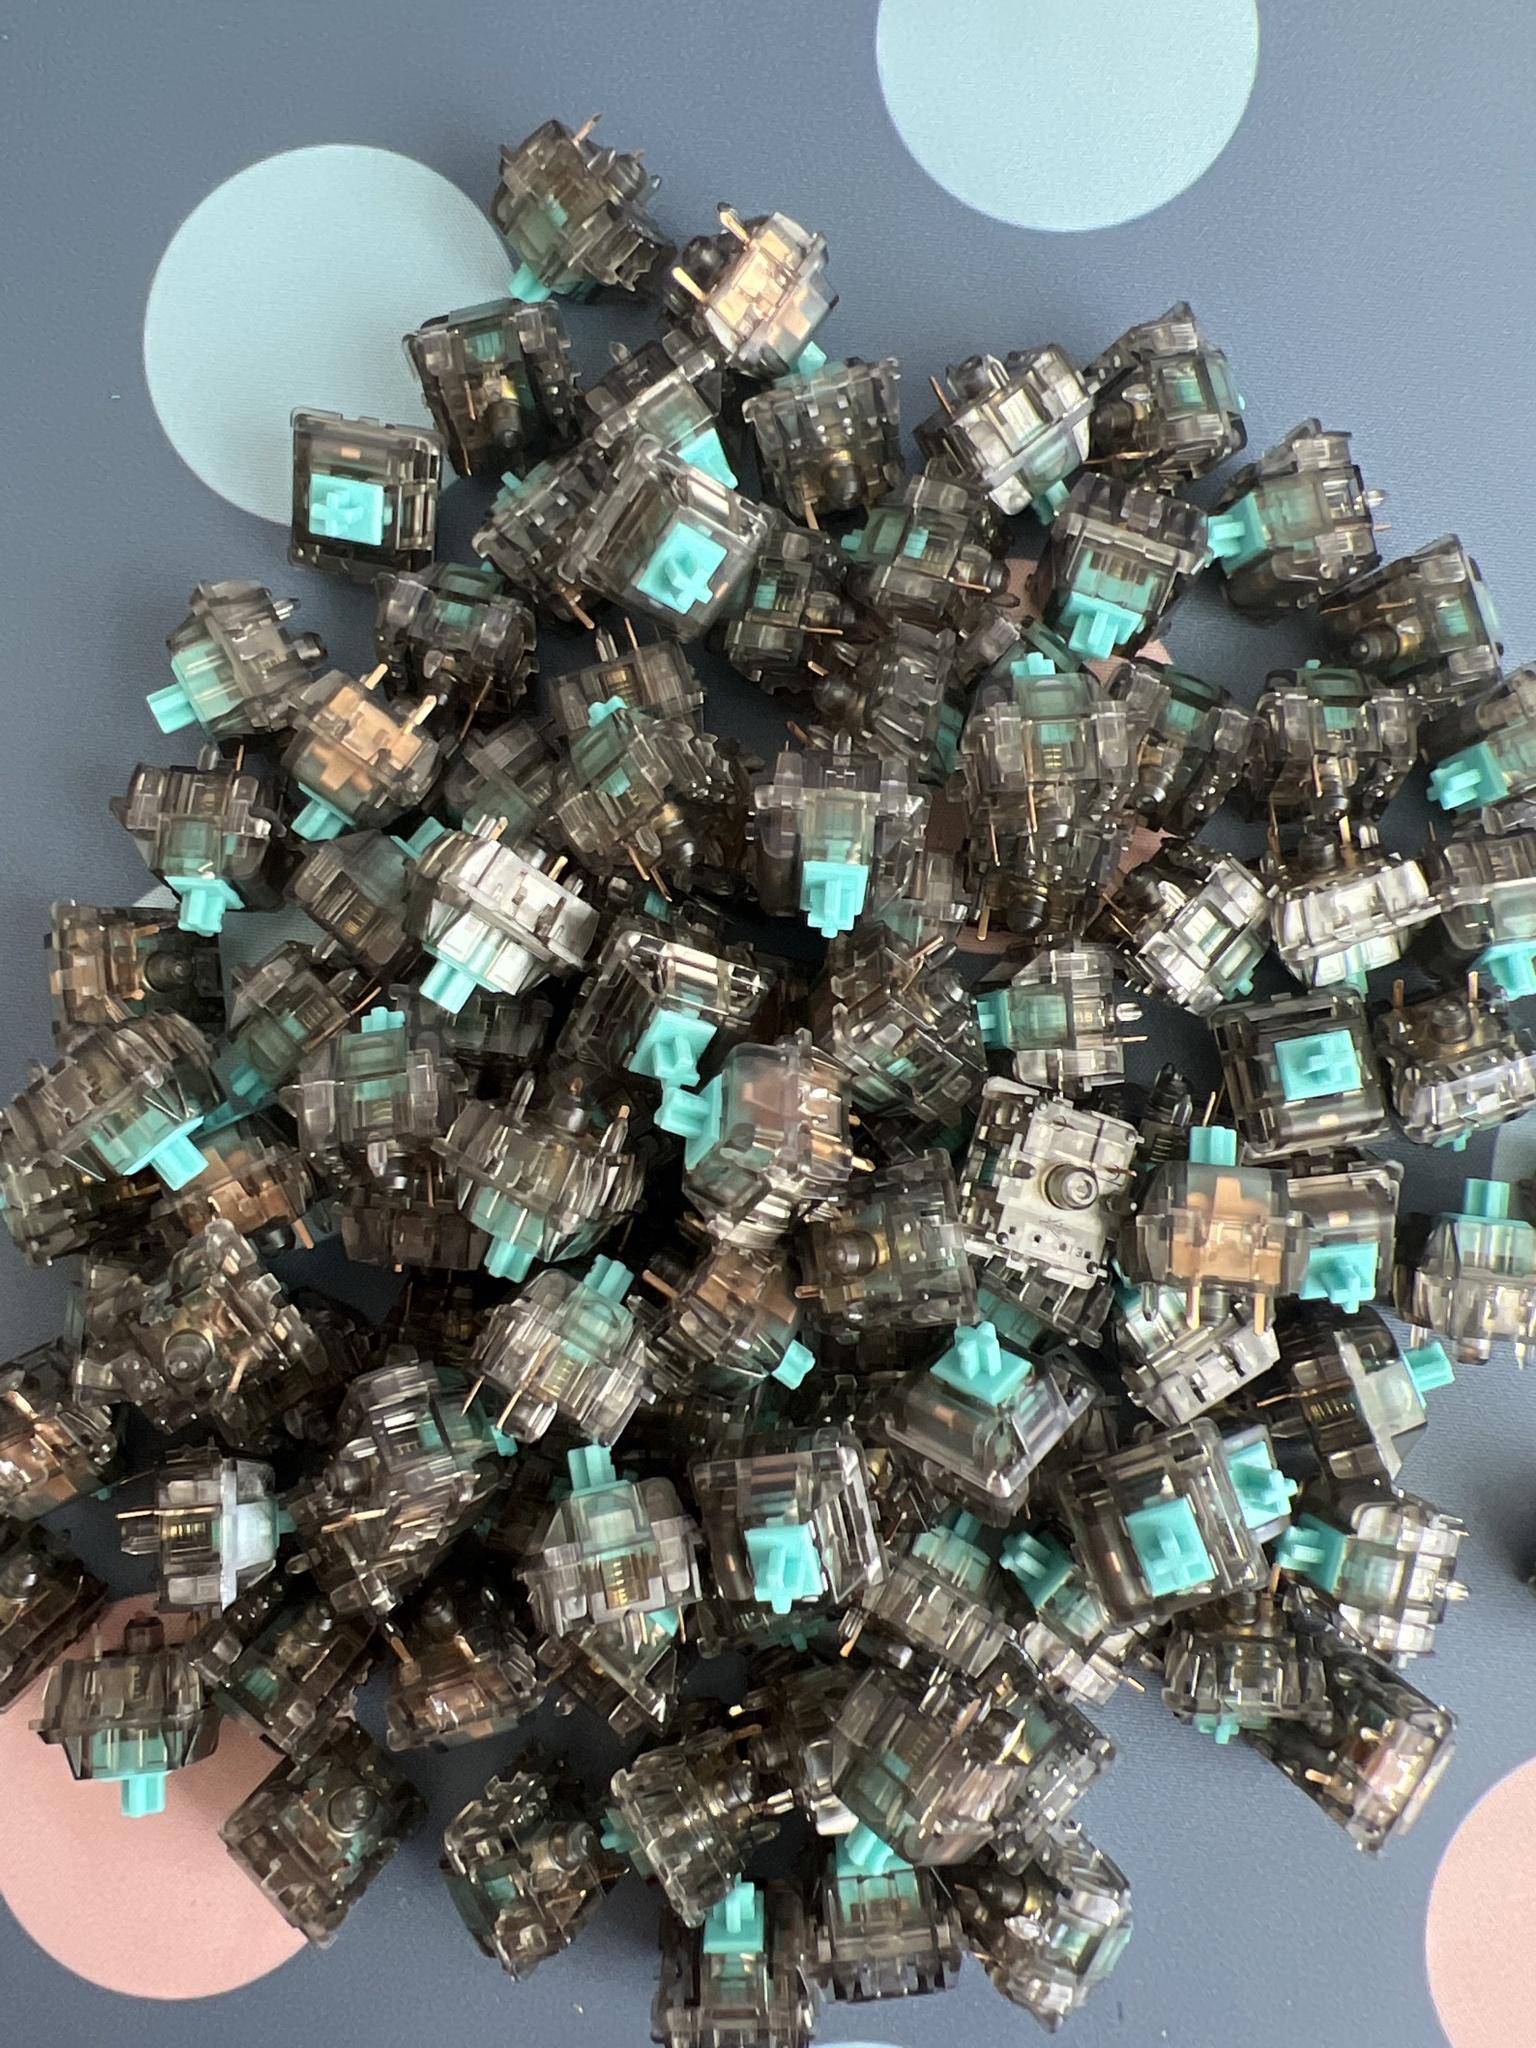 [KFA MARKETPLACE] 90 Durock L5 Linear Switches Teal (Smoke) 67g - KeebsForAll